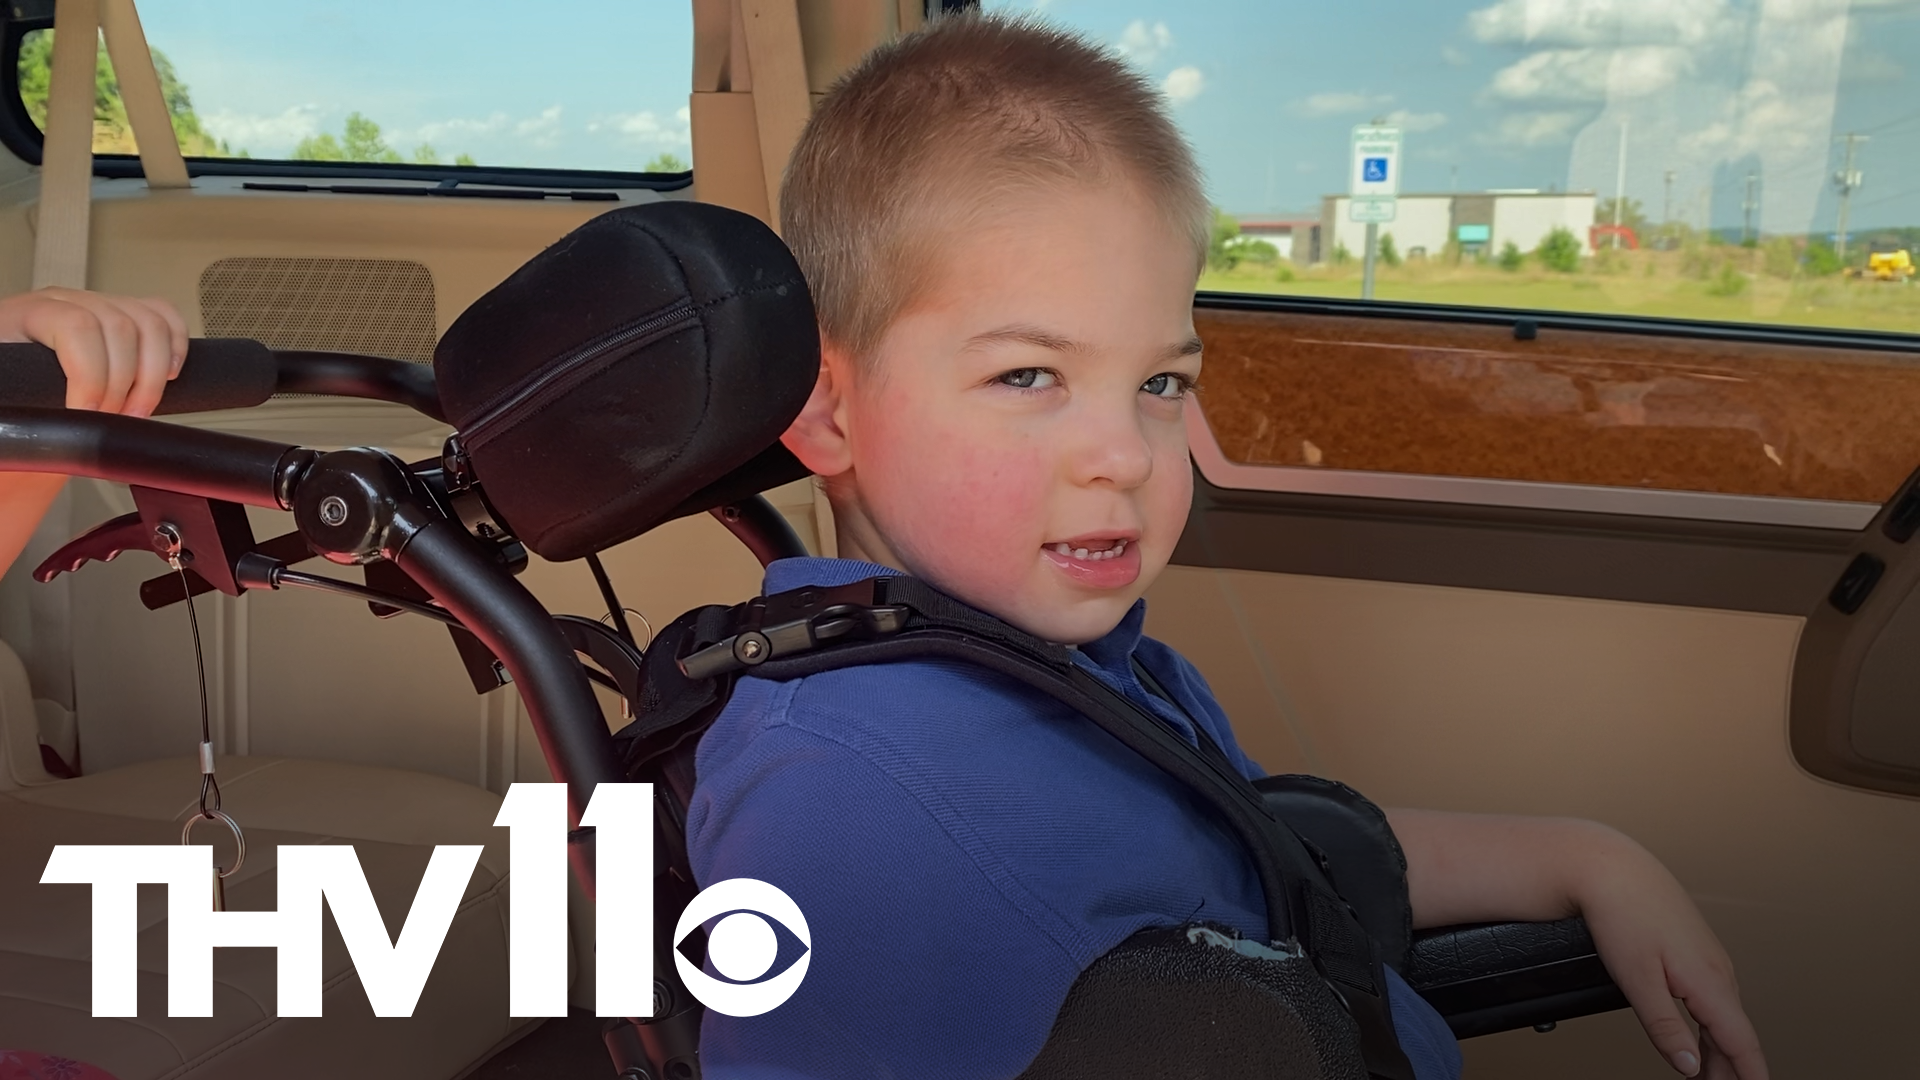 One Maumelle family was trying to find a handicap van for their young son, then a local business stepped in to save the day.